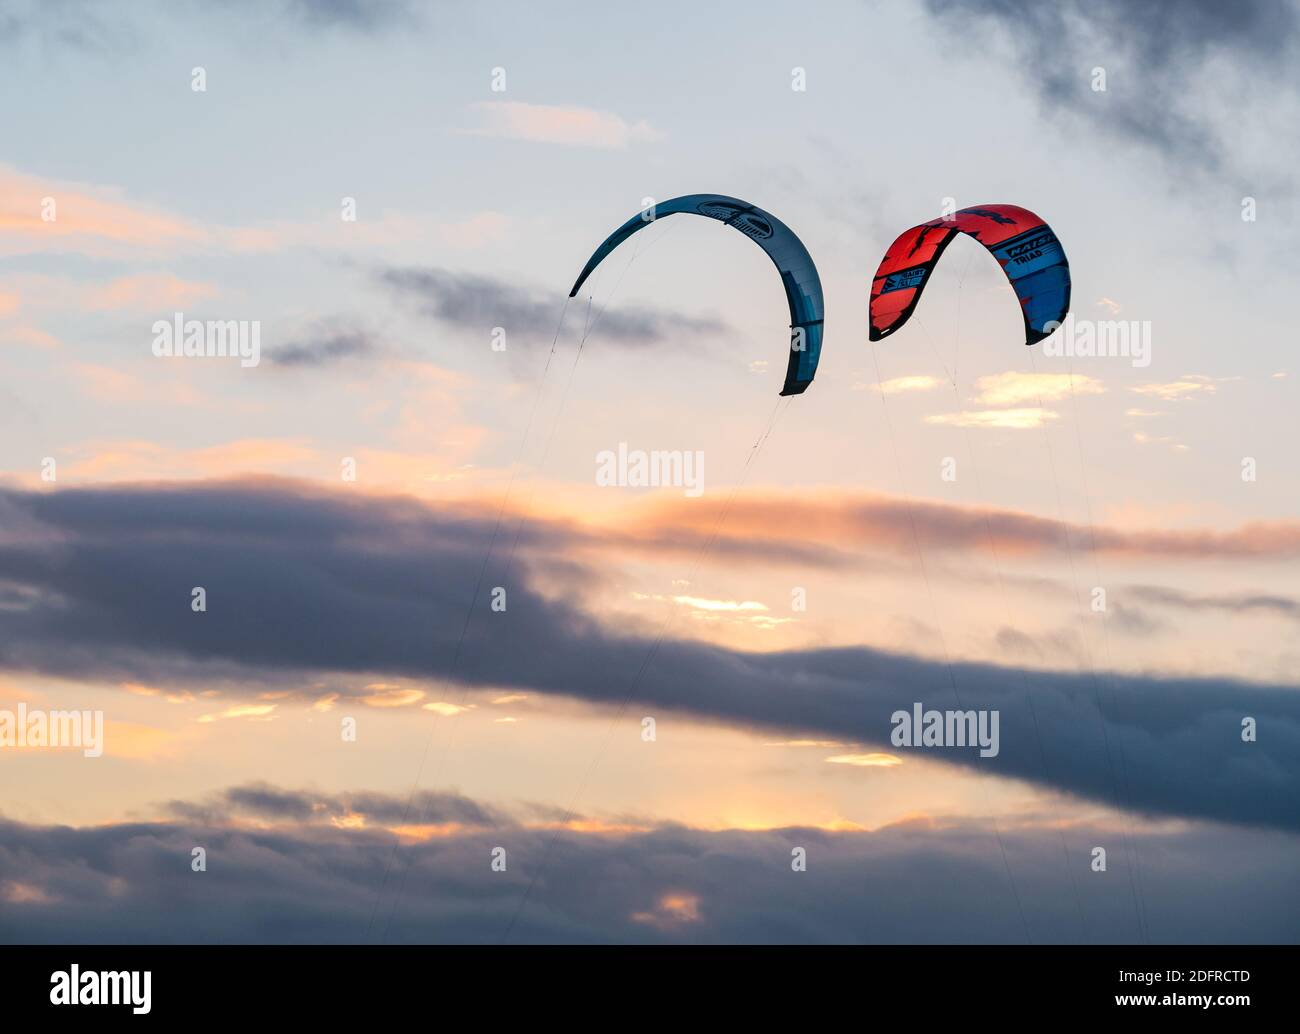 Two kites flying high up above clouds in the sky at sunset, Scotland, UK Stock Photo